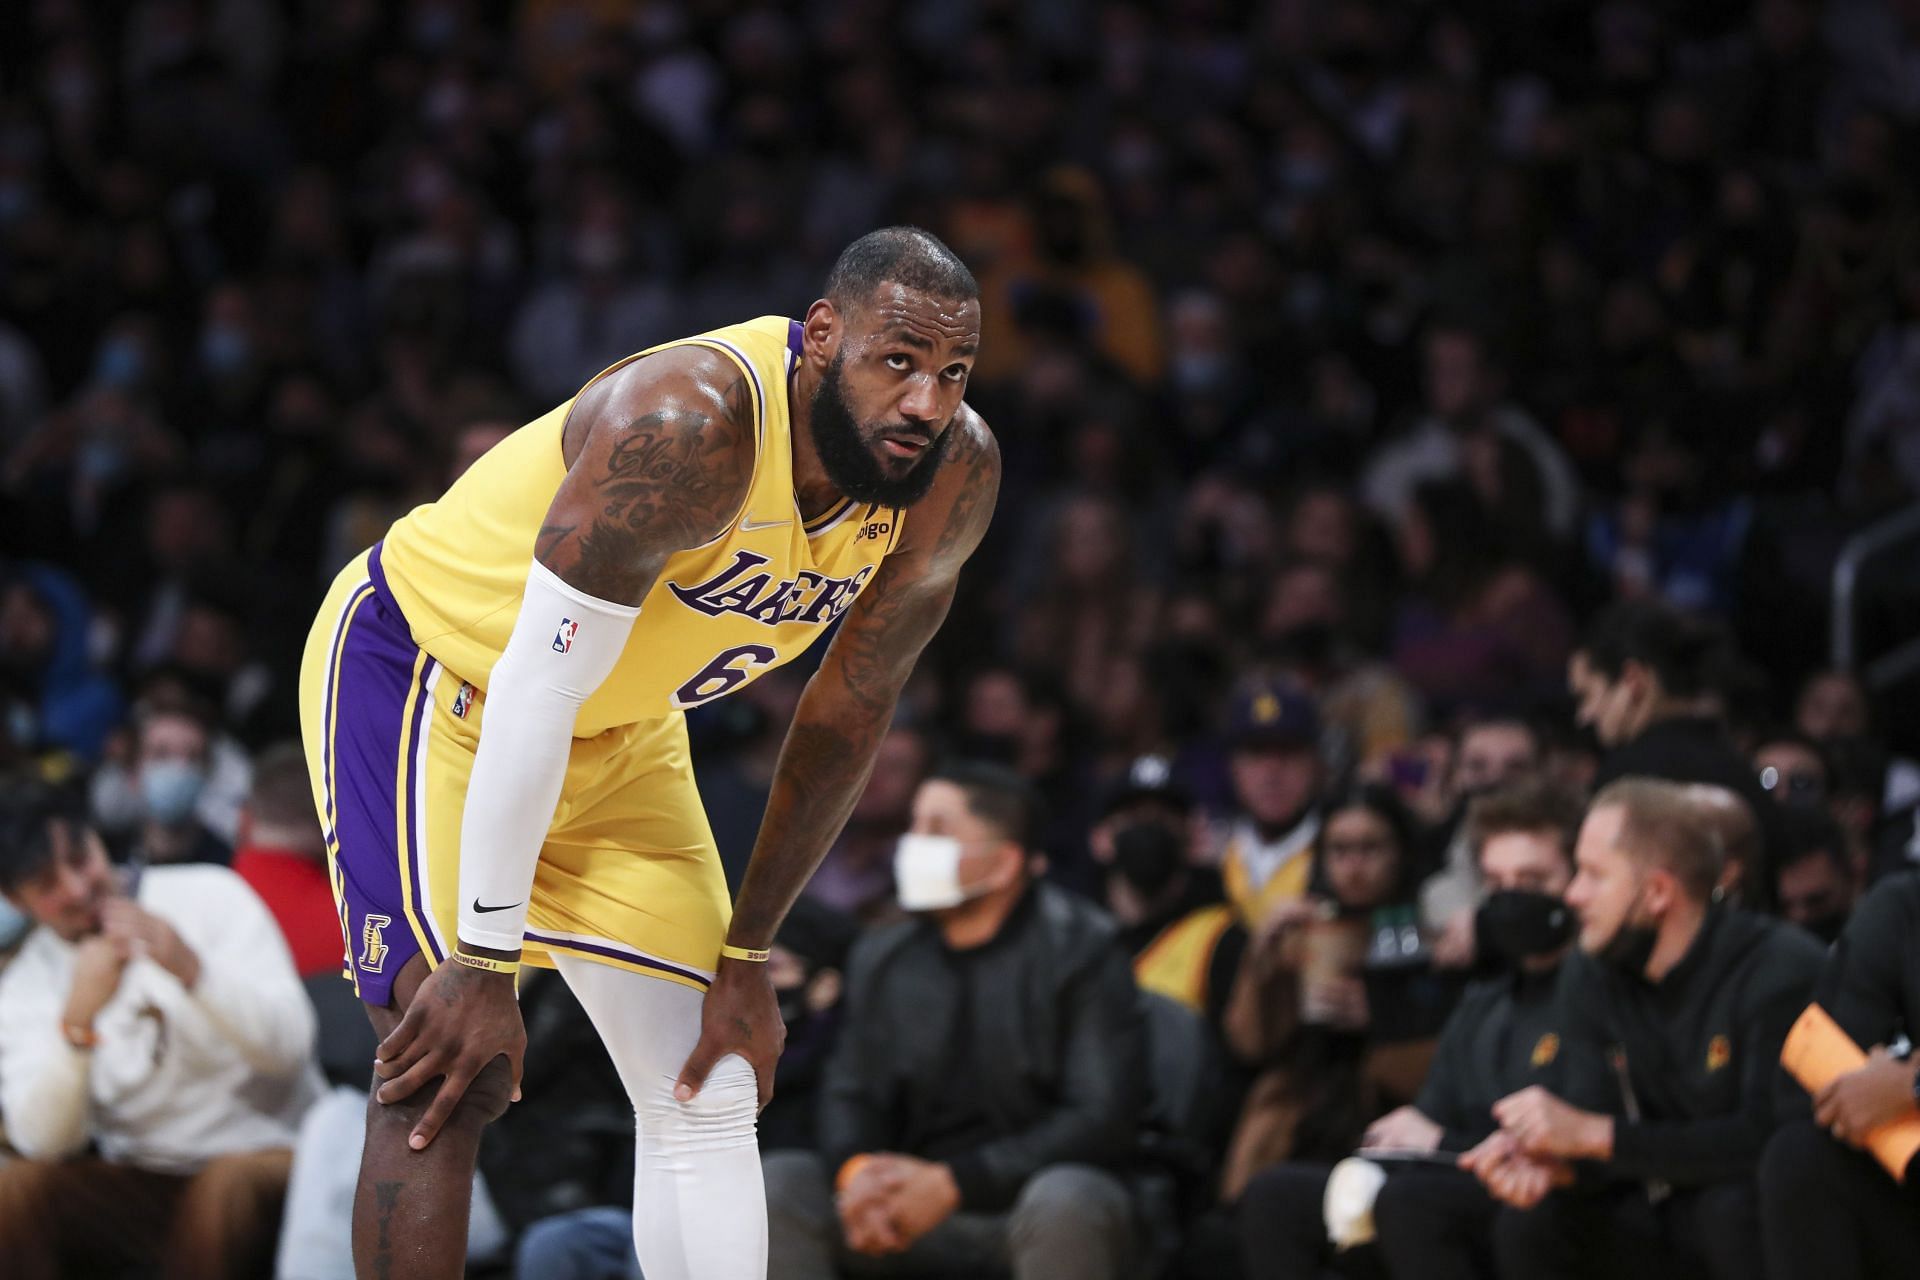 LA Lakers forward LeBron scored 34 points in 34 minutes in a 108-90 home loss to the Phoenix Suns.